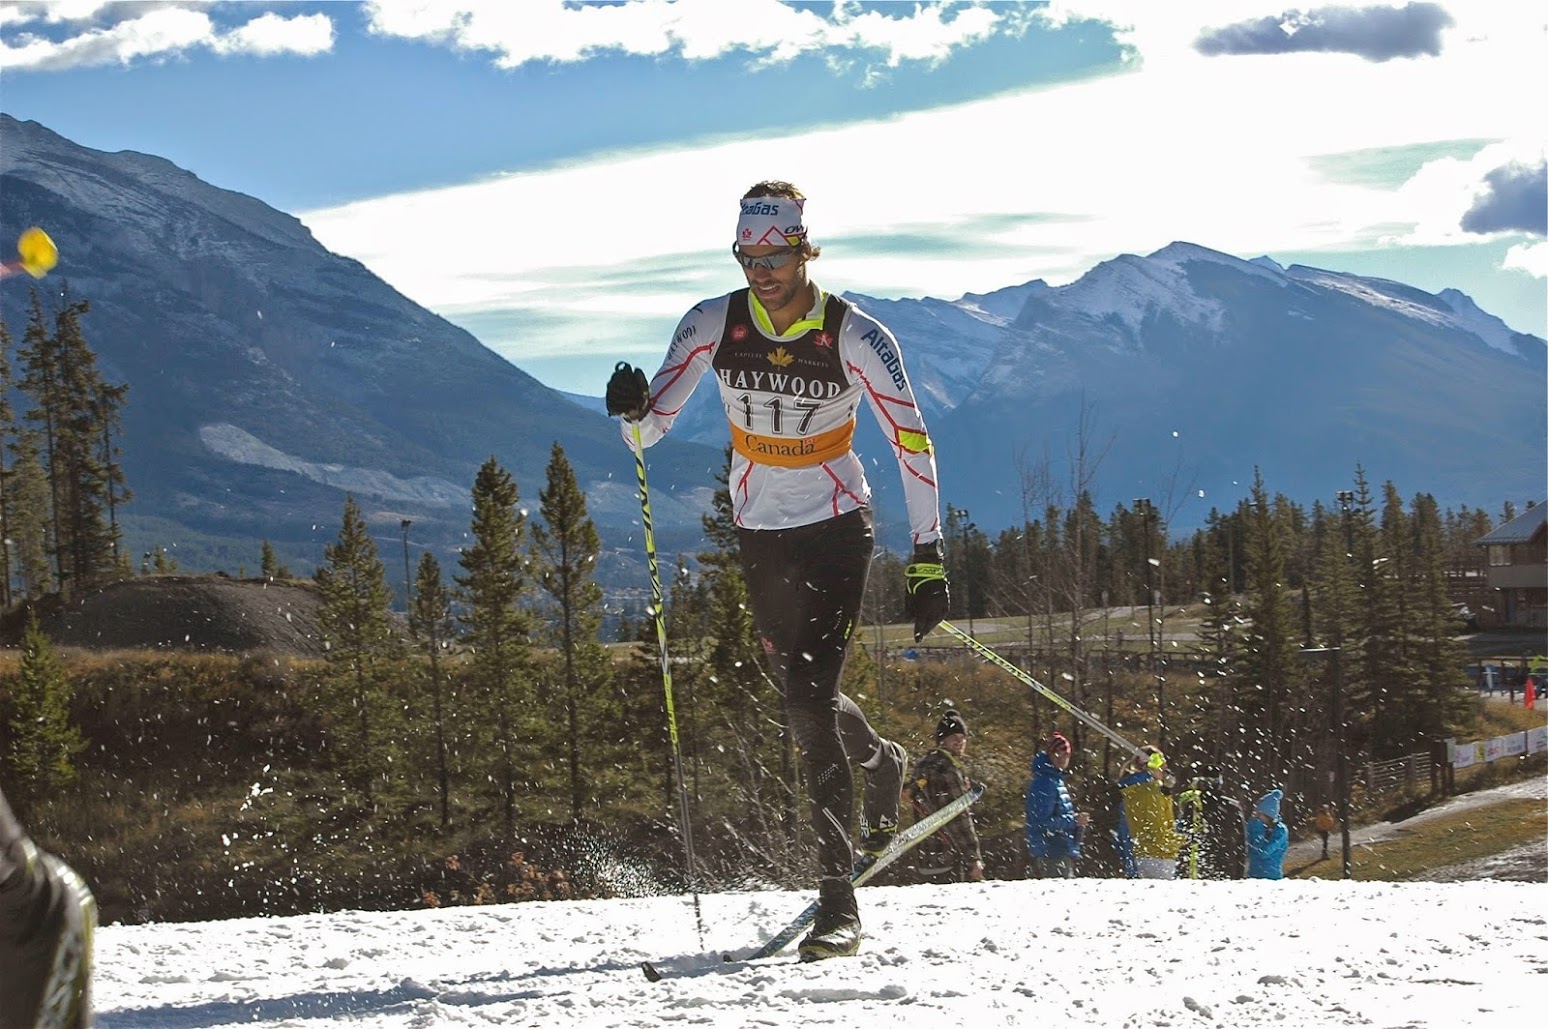 Lenny Valjas racing at Frozen Thunder in Canmore earlier this season. Photo: Angus Cockney.